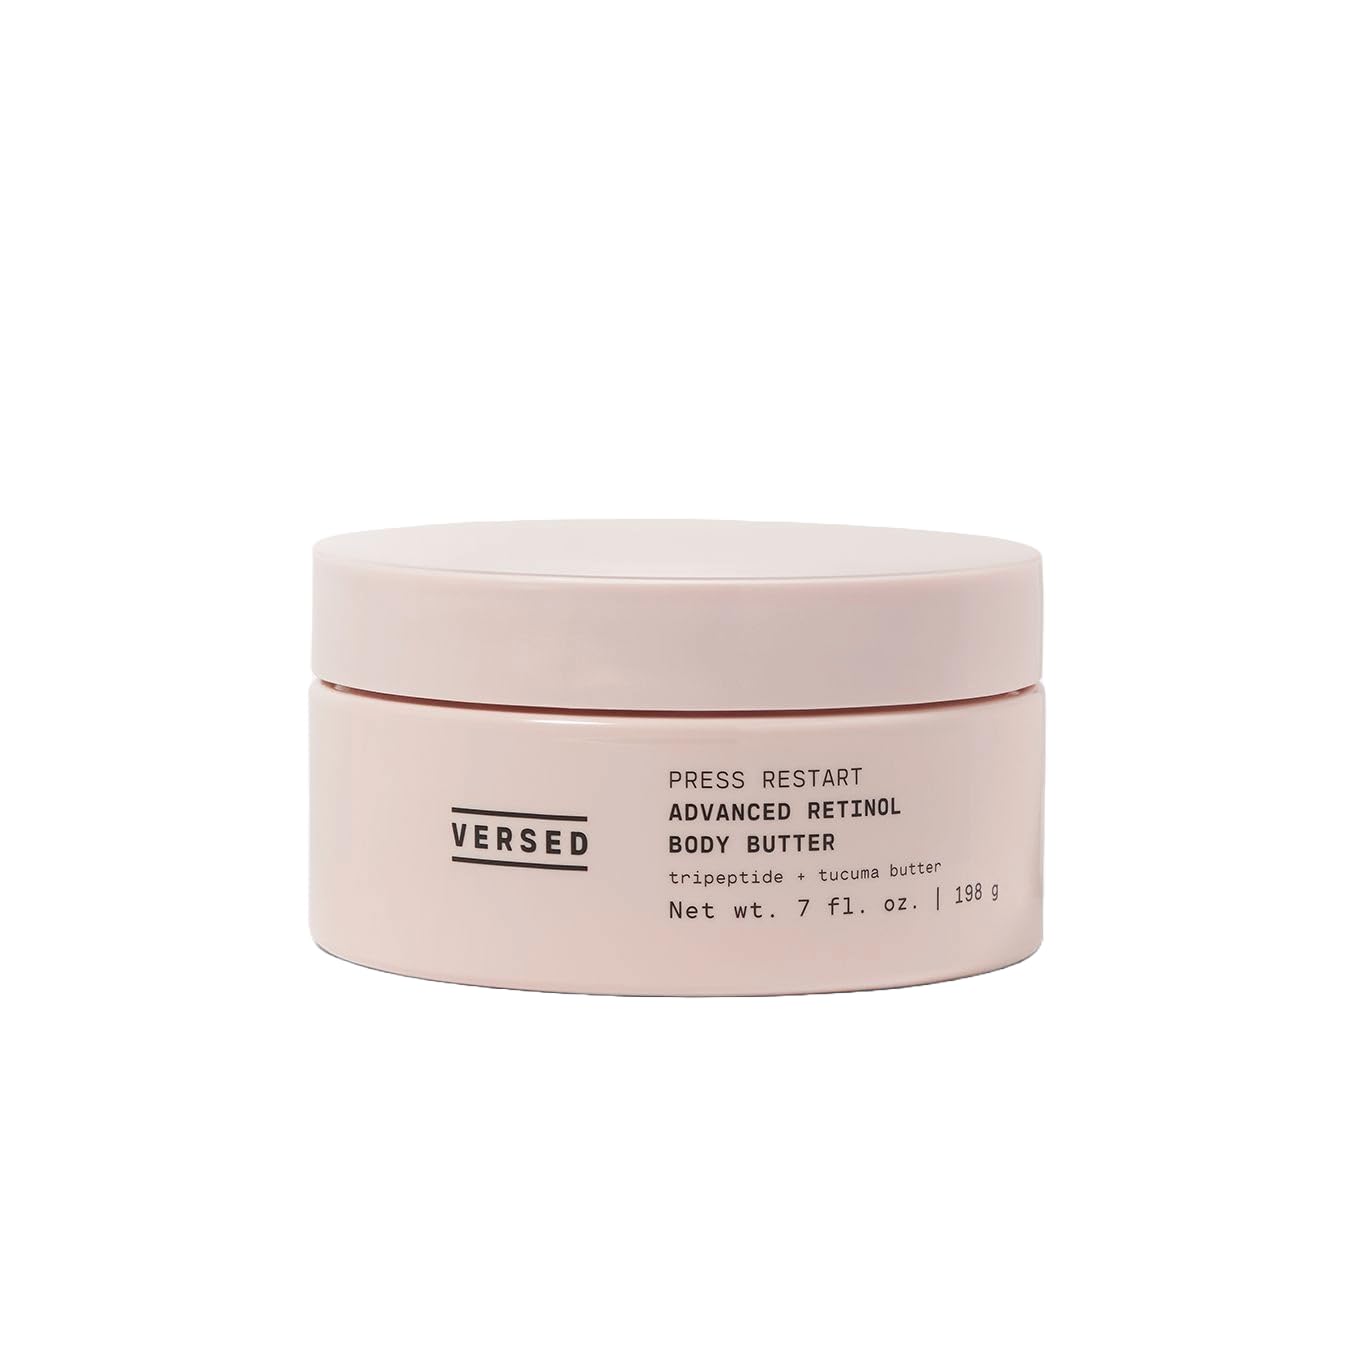 Versed Press Restart Advanced Retinol Body Butter - Encapsulated Retinol Body Lotion & Skin Firming Cream - Infused with a Tripeptide & Vitamin-Rich Butters to Repair and Renew Dry Skin (7 oz)